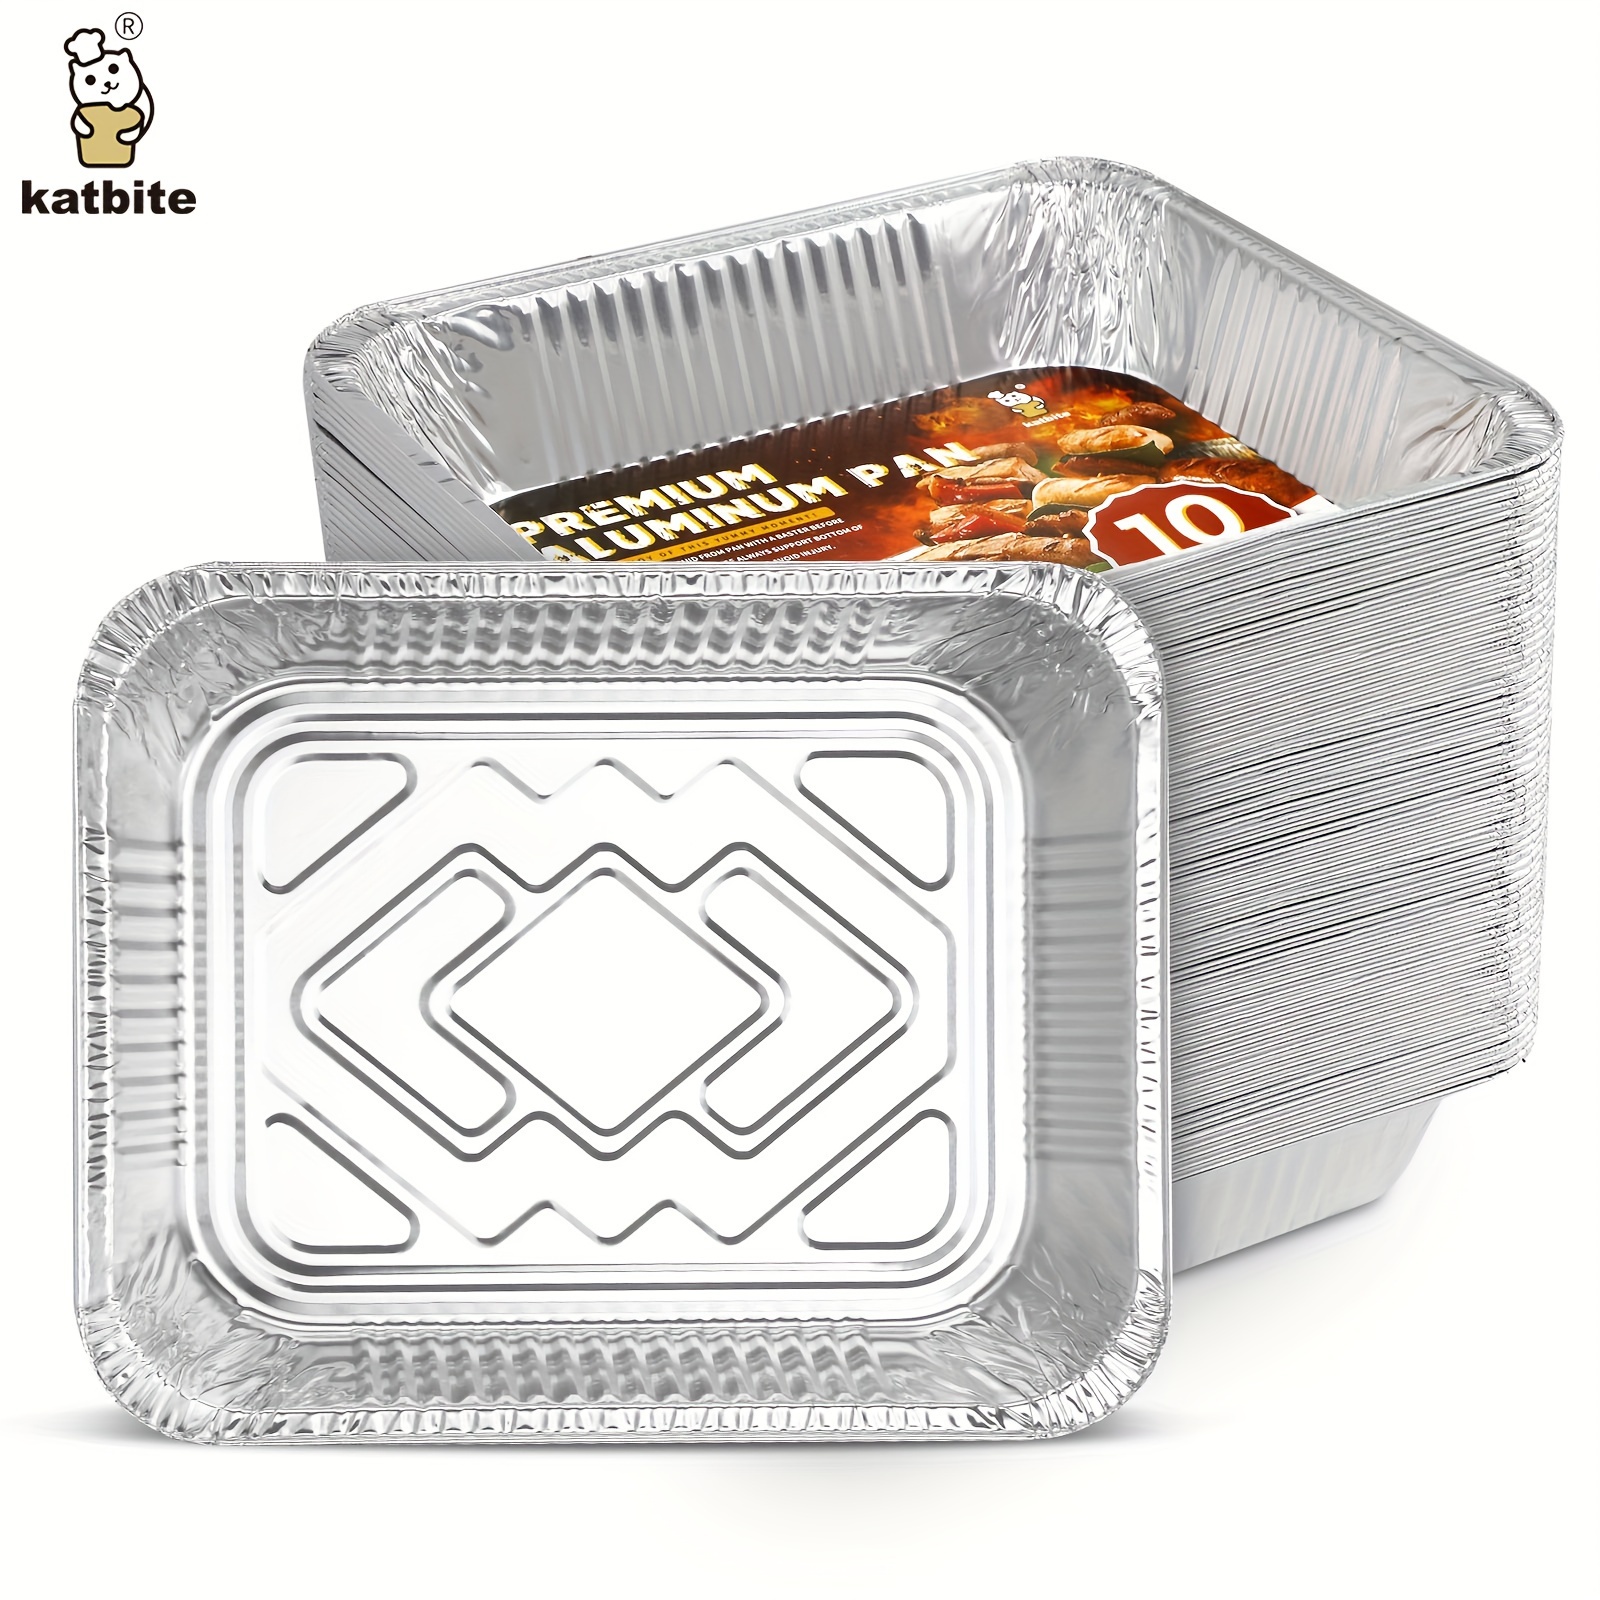 

Katbite Heavy Duty ( 8x8/9x13in)aluminum Pans - Premium Disposable Foil Baking Pans For Air Fryer, Cooking, Heating, Storing & Prepping Food